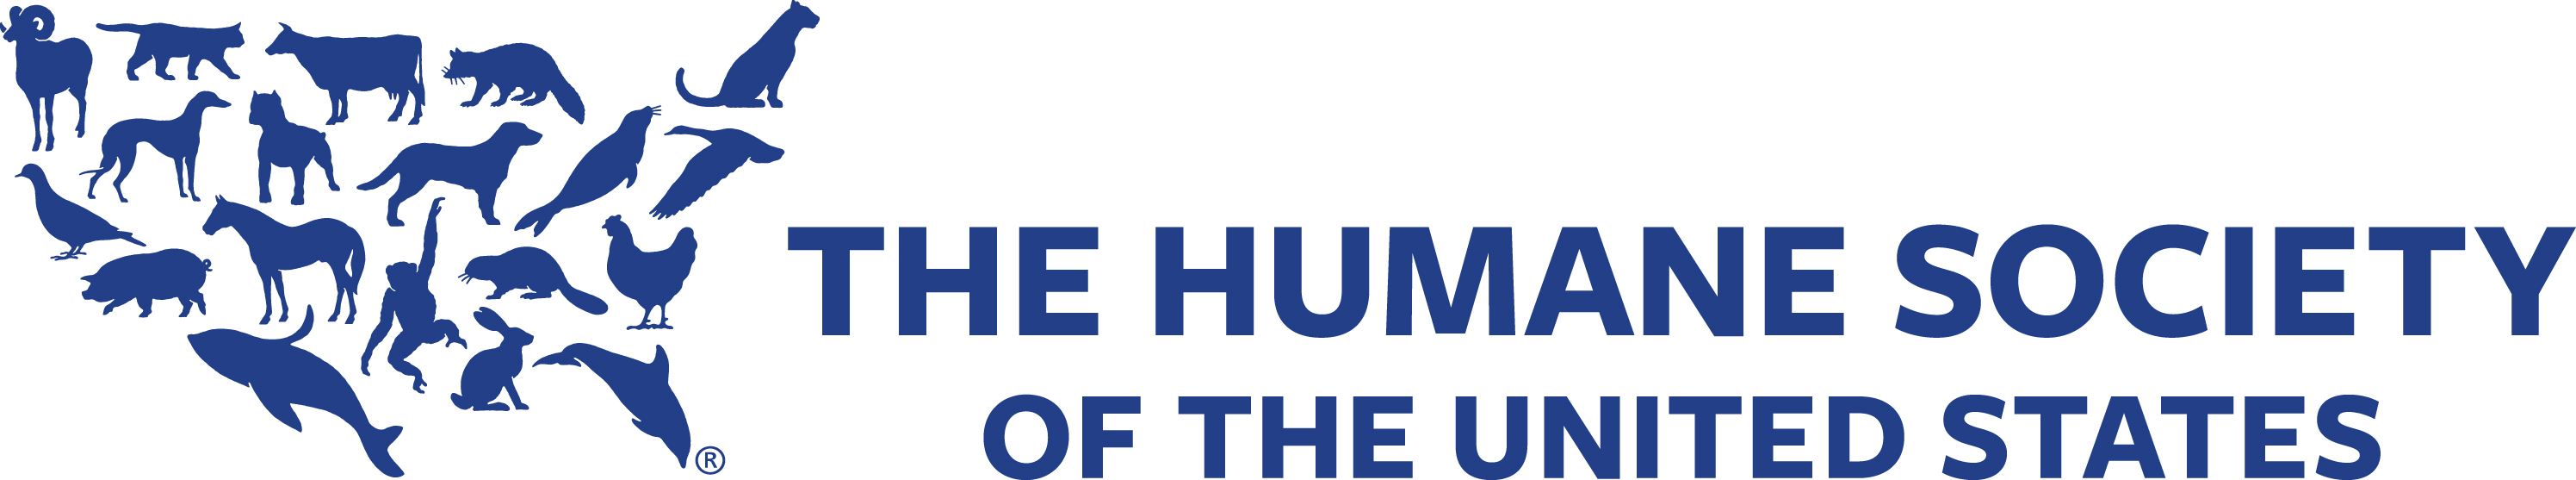 The Humane Society of the United States, GA